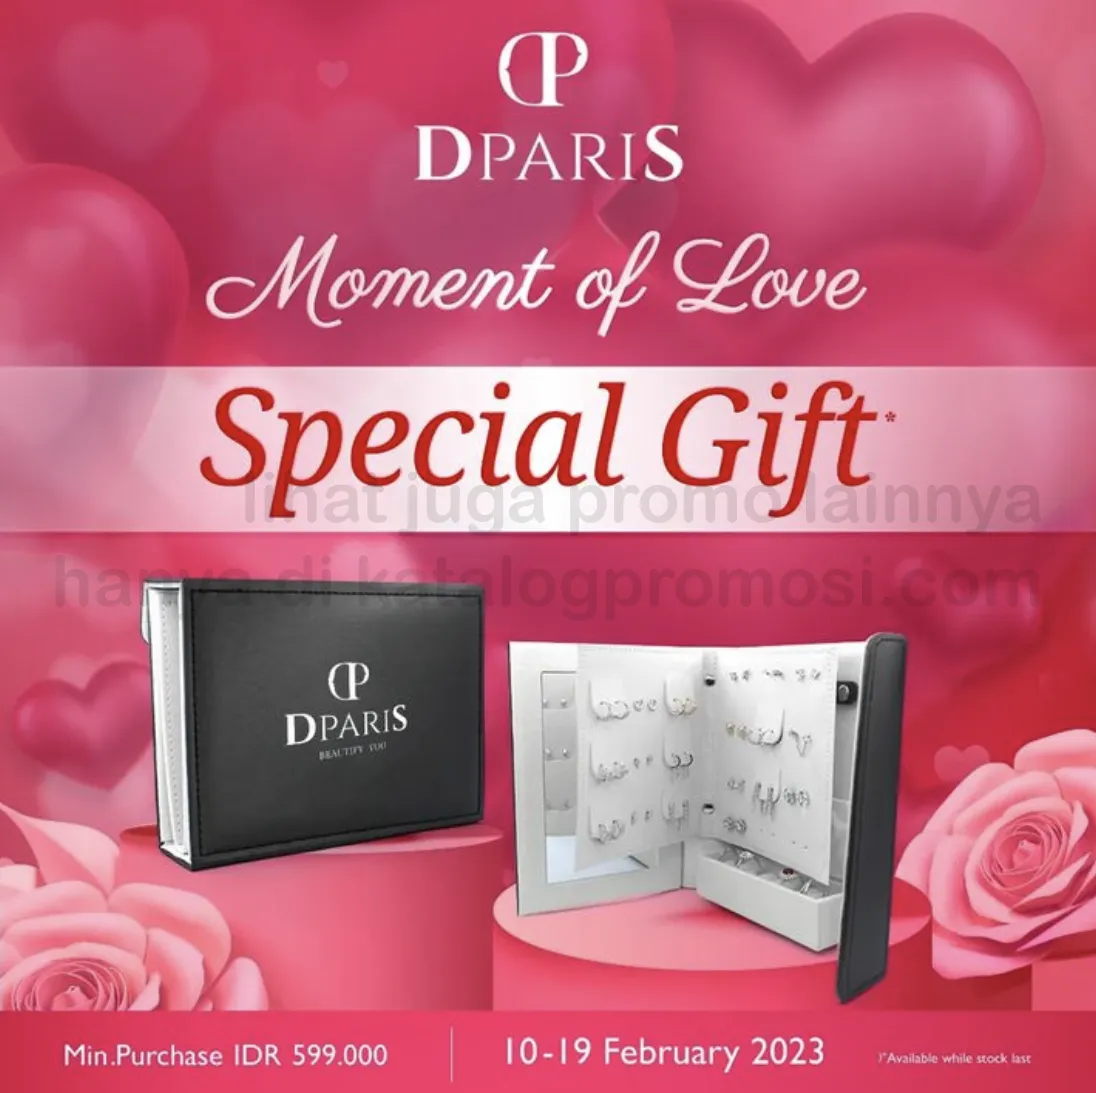 Promo DPARIS Valentine's Day Moment of Love - Get SPECIAL GIFT